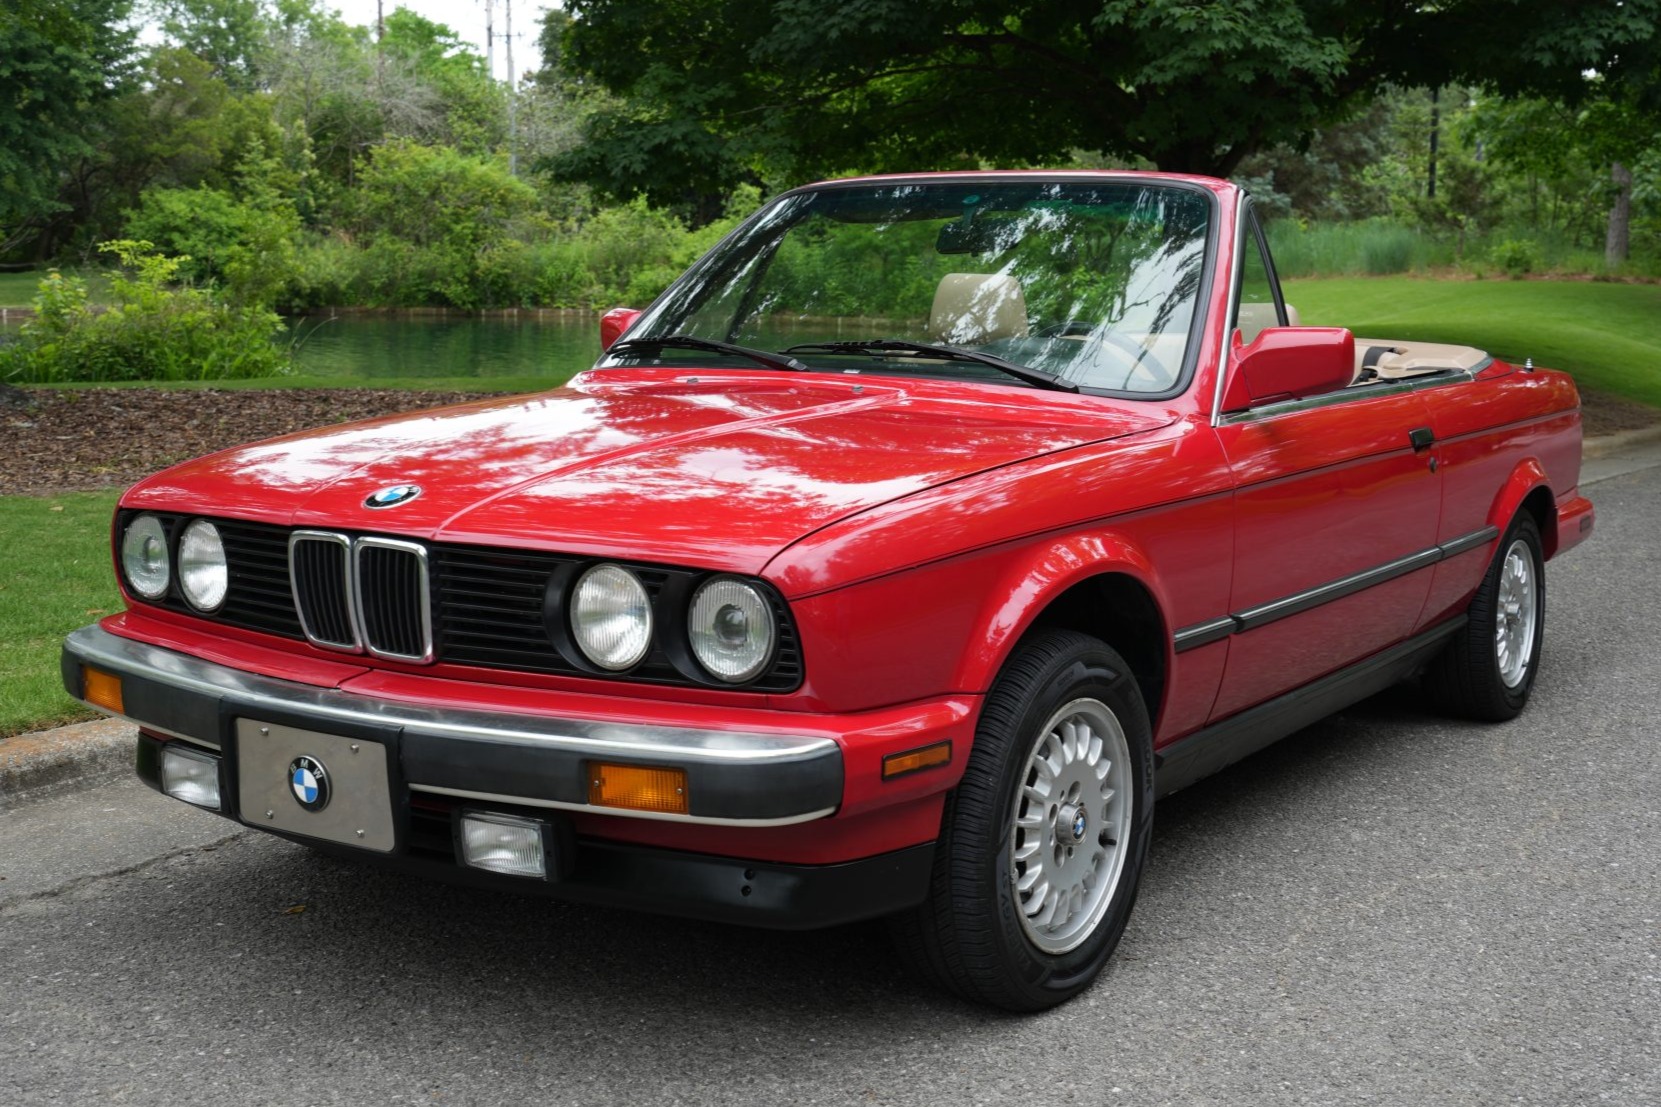 Used 1989 BMW 325i Convertible 5-Speed Review